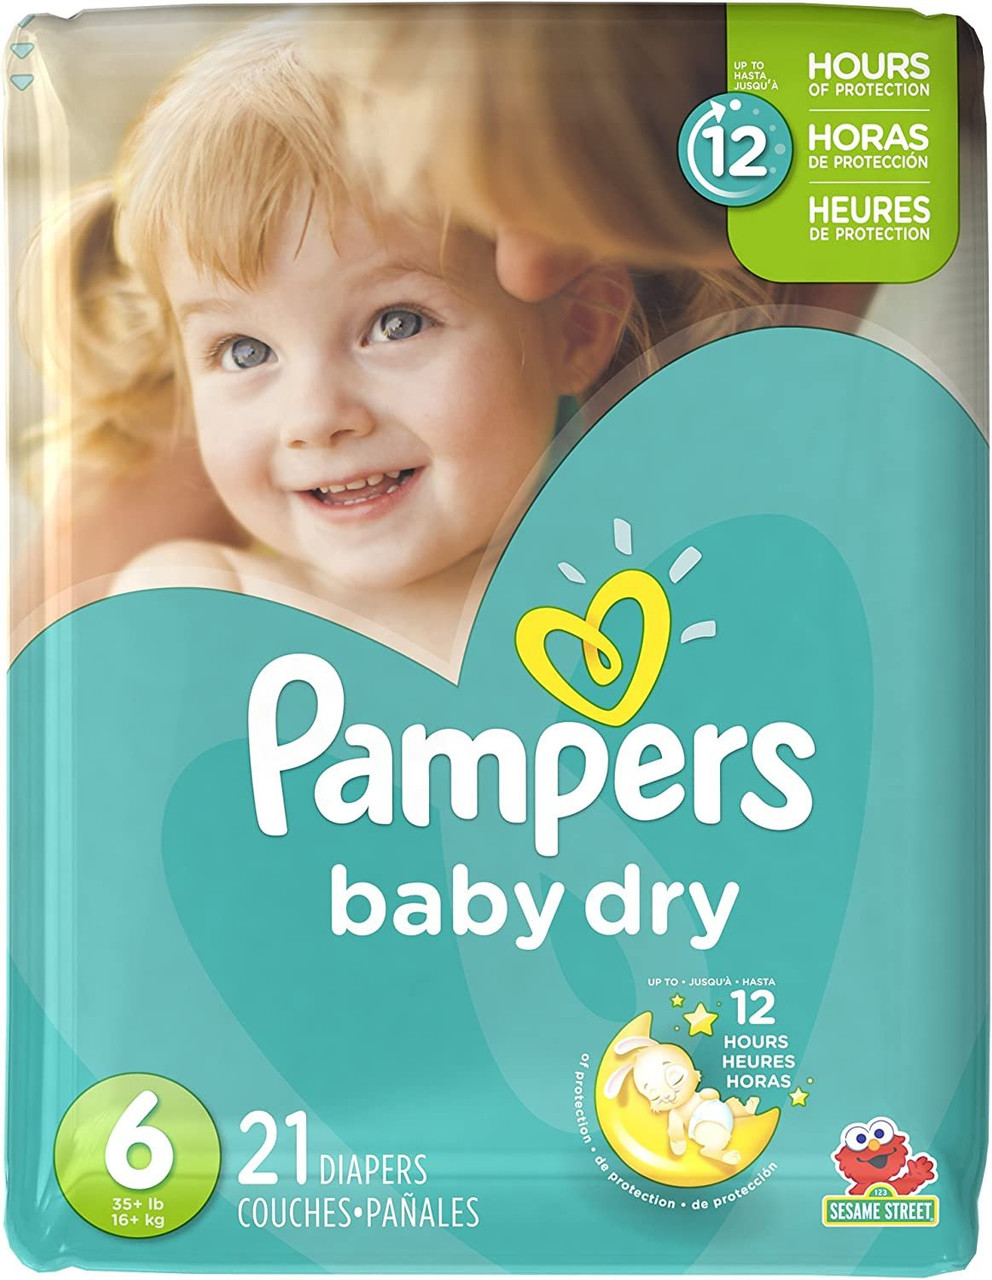 Portaal tafel capsule Pampers Baby Dry Diapers Size 6 Jumbo Pack 21 Count, (Pack of 4) (Packaging  & Prints May Vary) - Name Brand Overstock